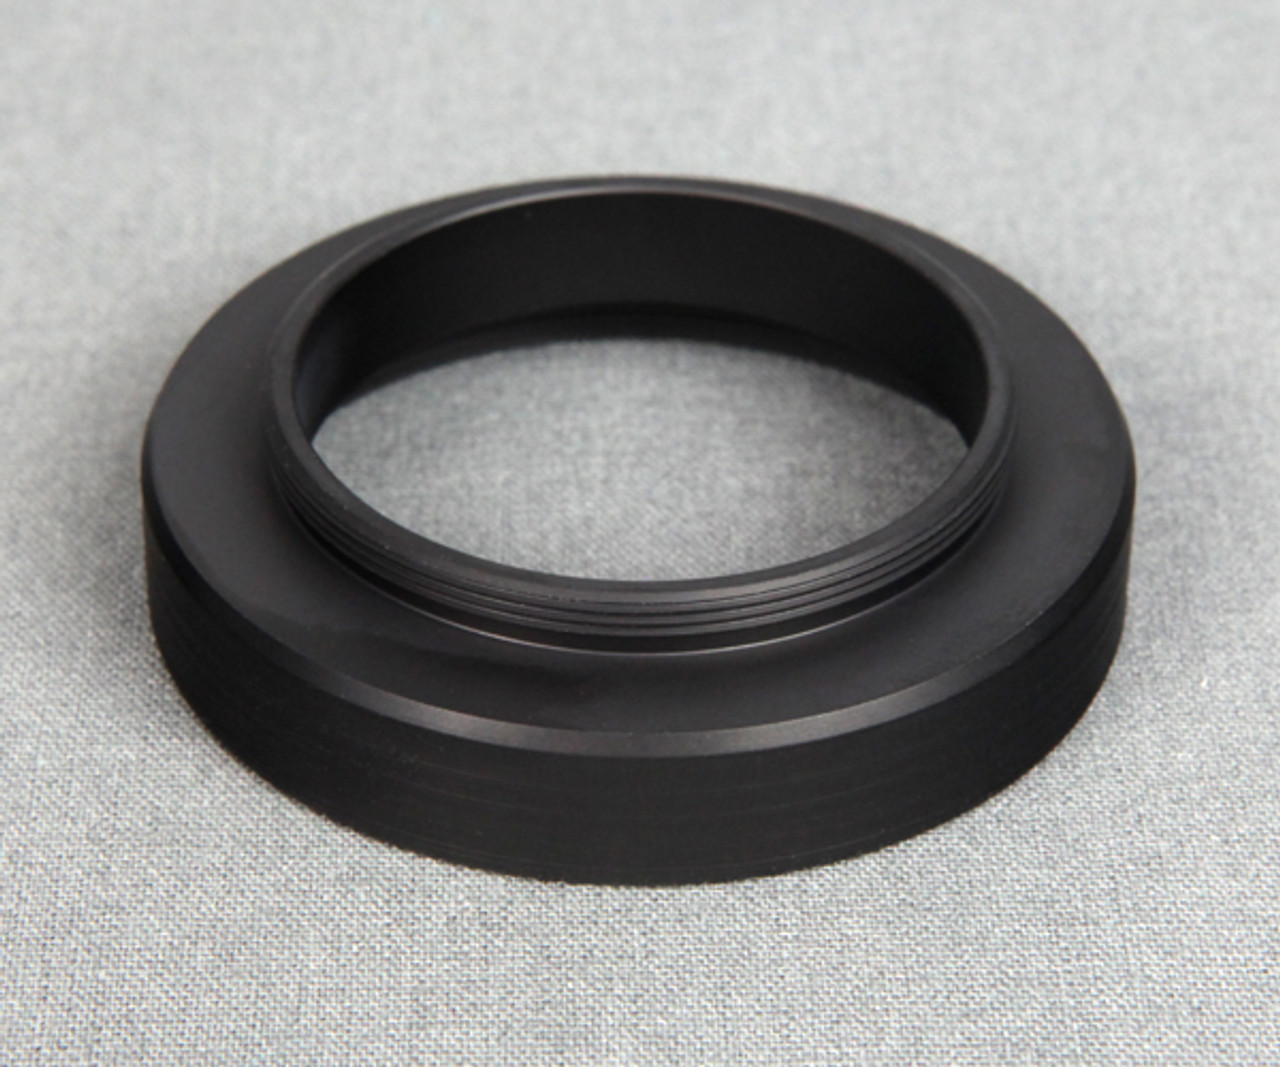 48 mm Female to 42 mm Male Adapter - SFA-F48M42-008